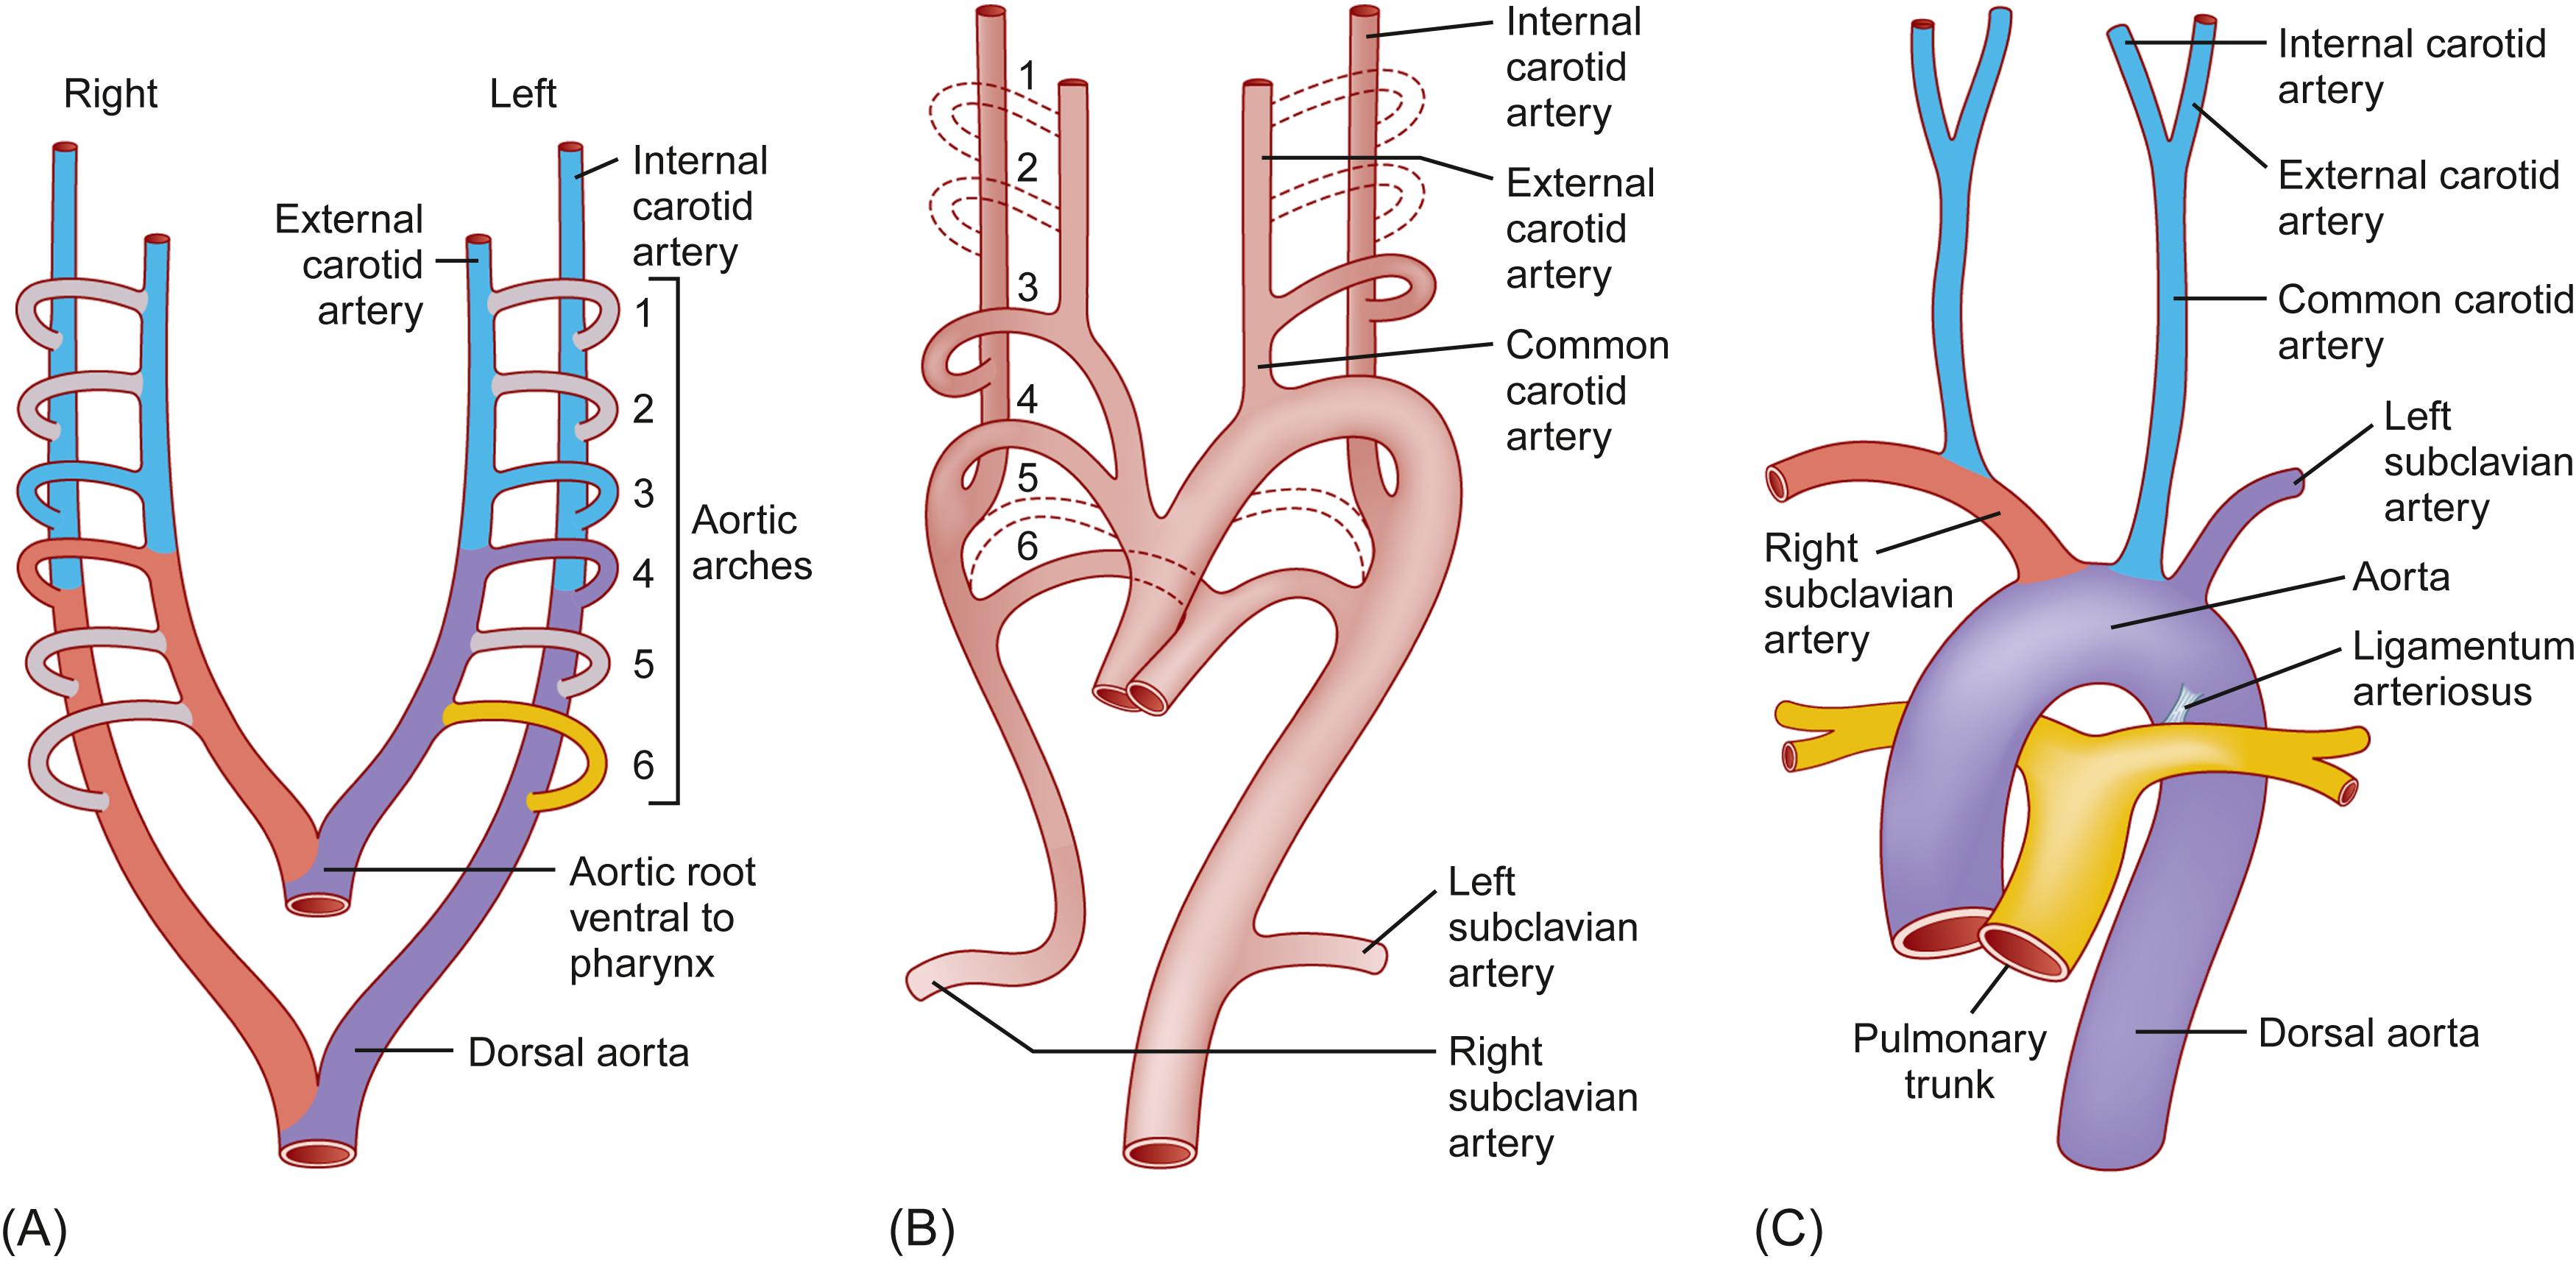 Figure 6.6, Changes which occur in embryonic aortic arches. First aortic arches form portions of the maxillary and external carotid arteries; second arches form stapedial arteries; third arches form common carotid arteries and portions of the internal carotid arteries; fourth arches form aortic arch on the left, proximal subclavian artery on the right; fifth arches are absent or rudimentary in the adult; and sixth arches form portions of the right and left pulmonary arteries and ductus arteriosus on the left. Thus the important contributions are from the third, fourth, and sixth arches. (A) Embryonic aortic arch system. (B) Embryonic modifications of aortic arches. (C) Adult derivates of aortic arches.